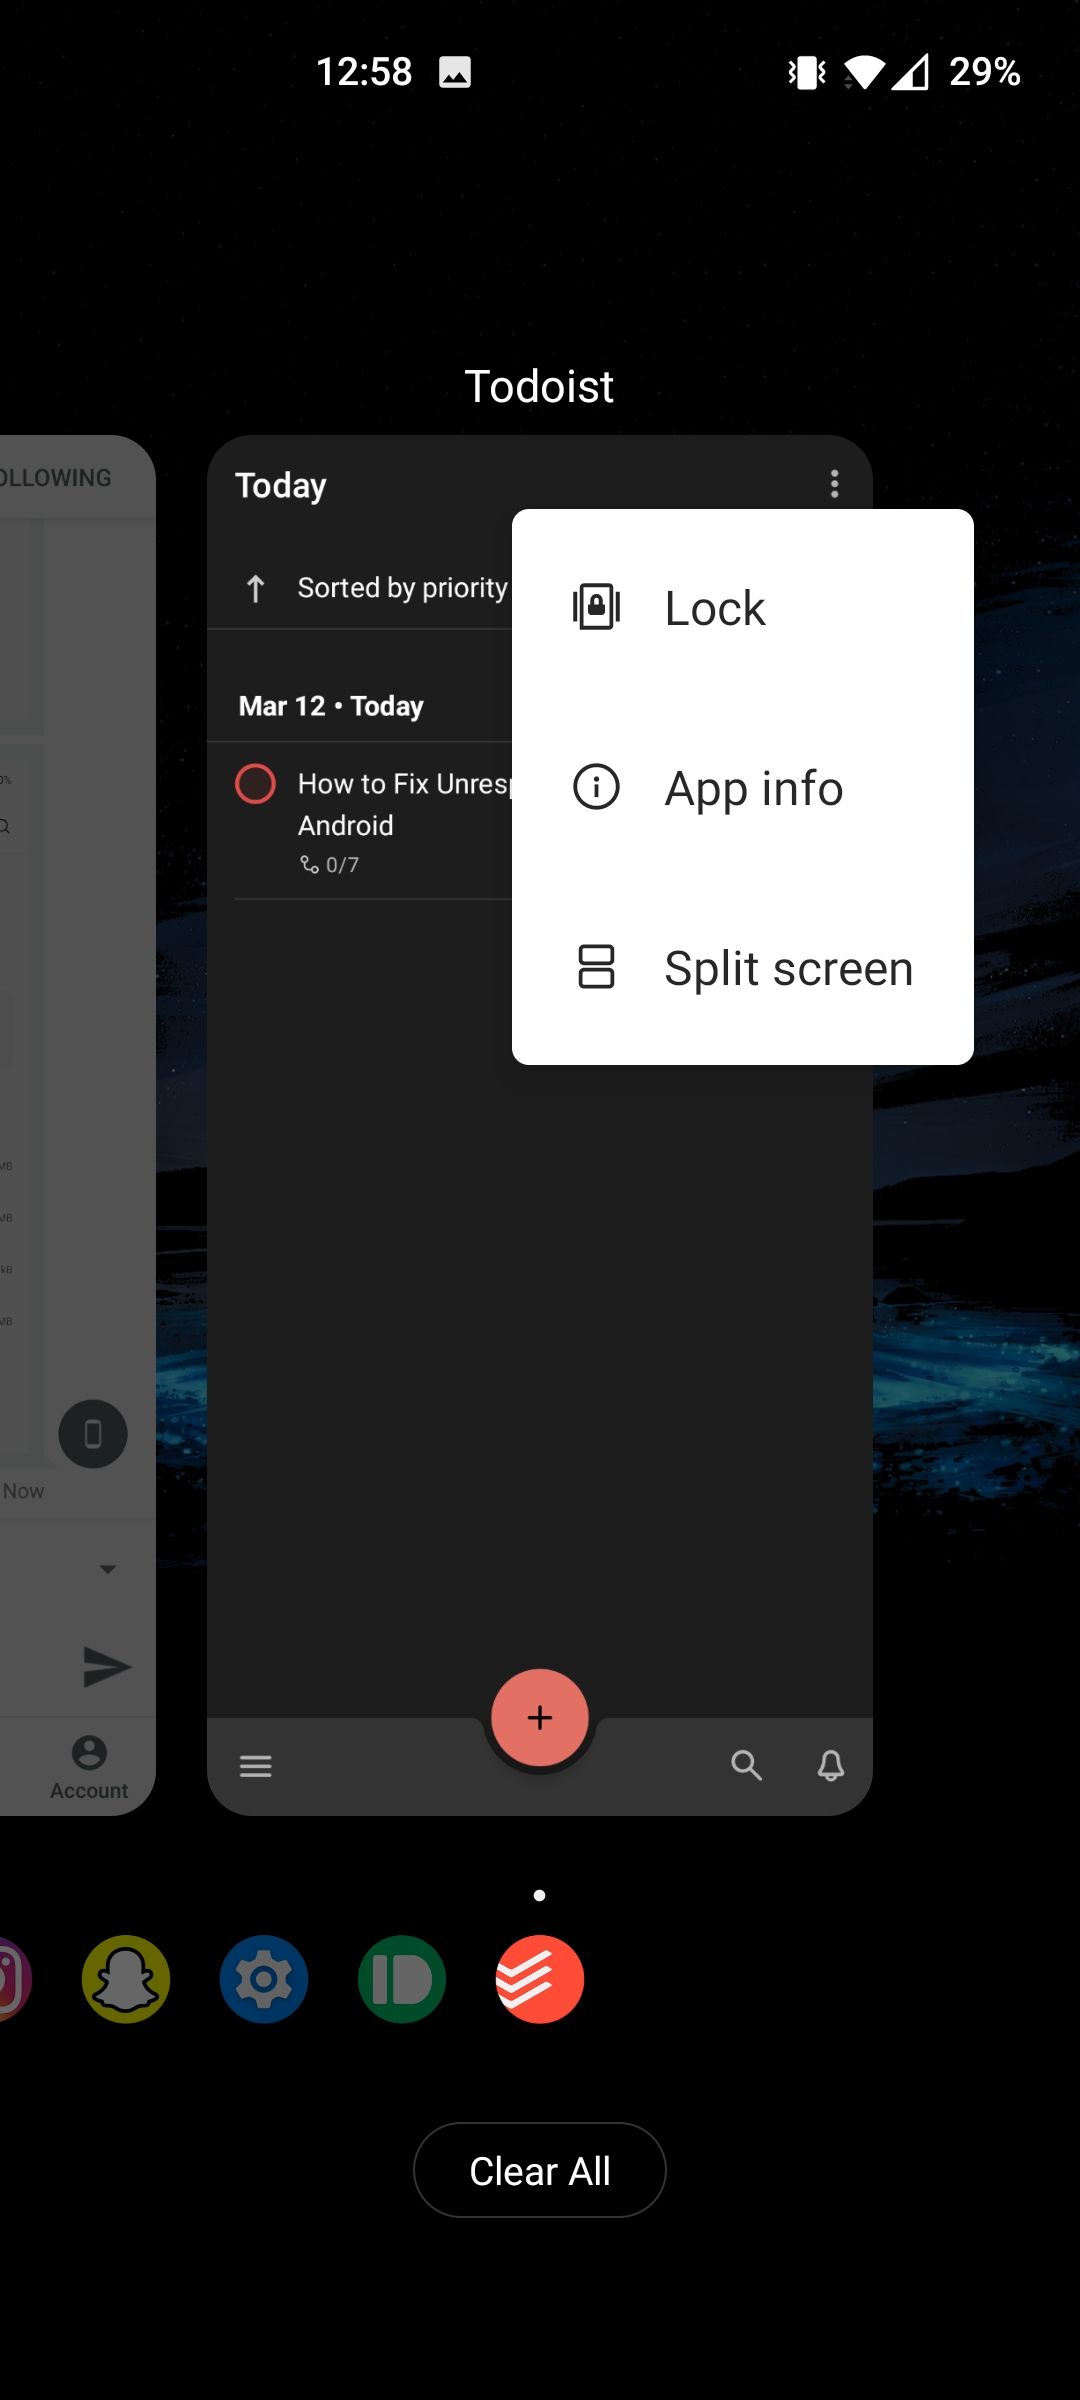 Menu with an option to lock app